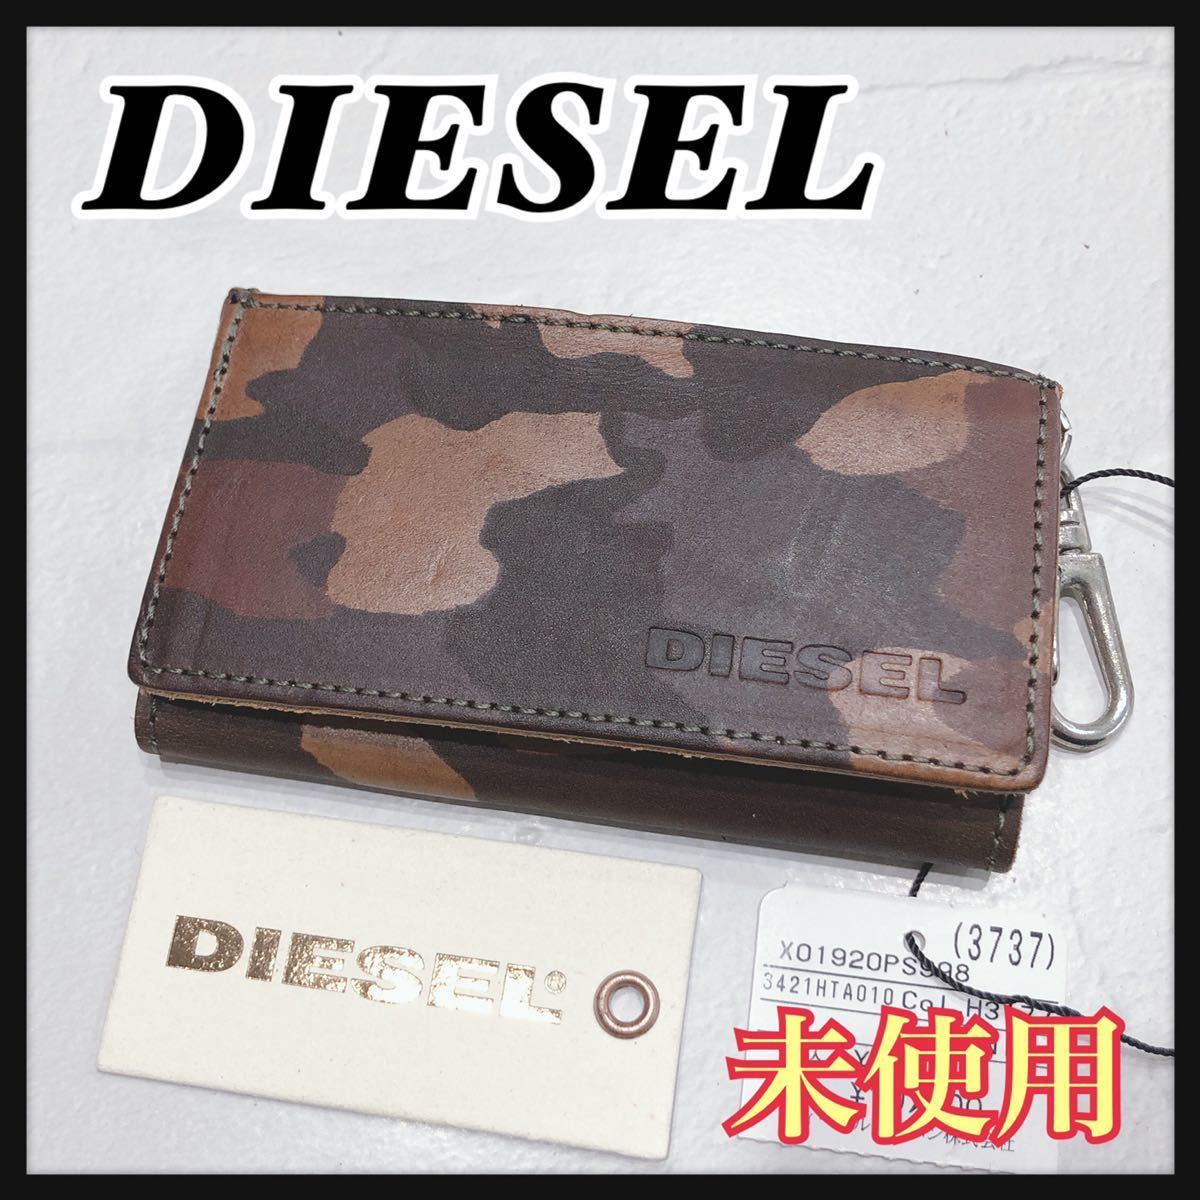 * new goods unused * DIESEL diesel key case 6 ream camouflage pattern camouflage pattern Brown beige leather key holder tag attaching men's free shipping 